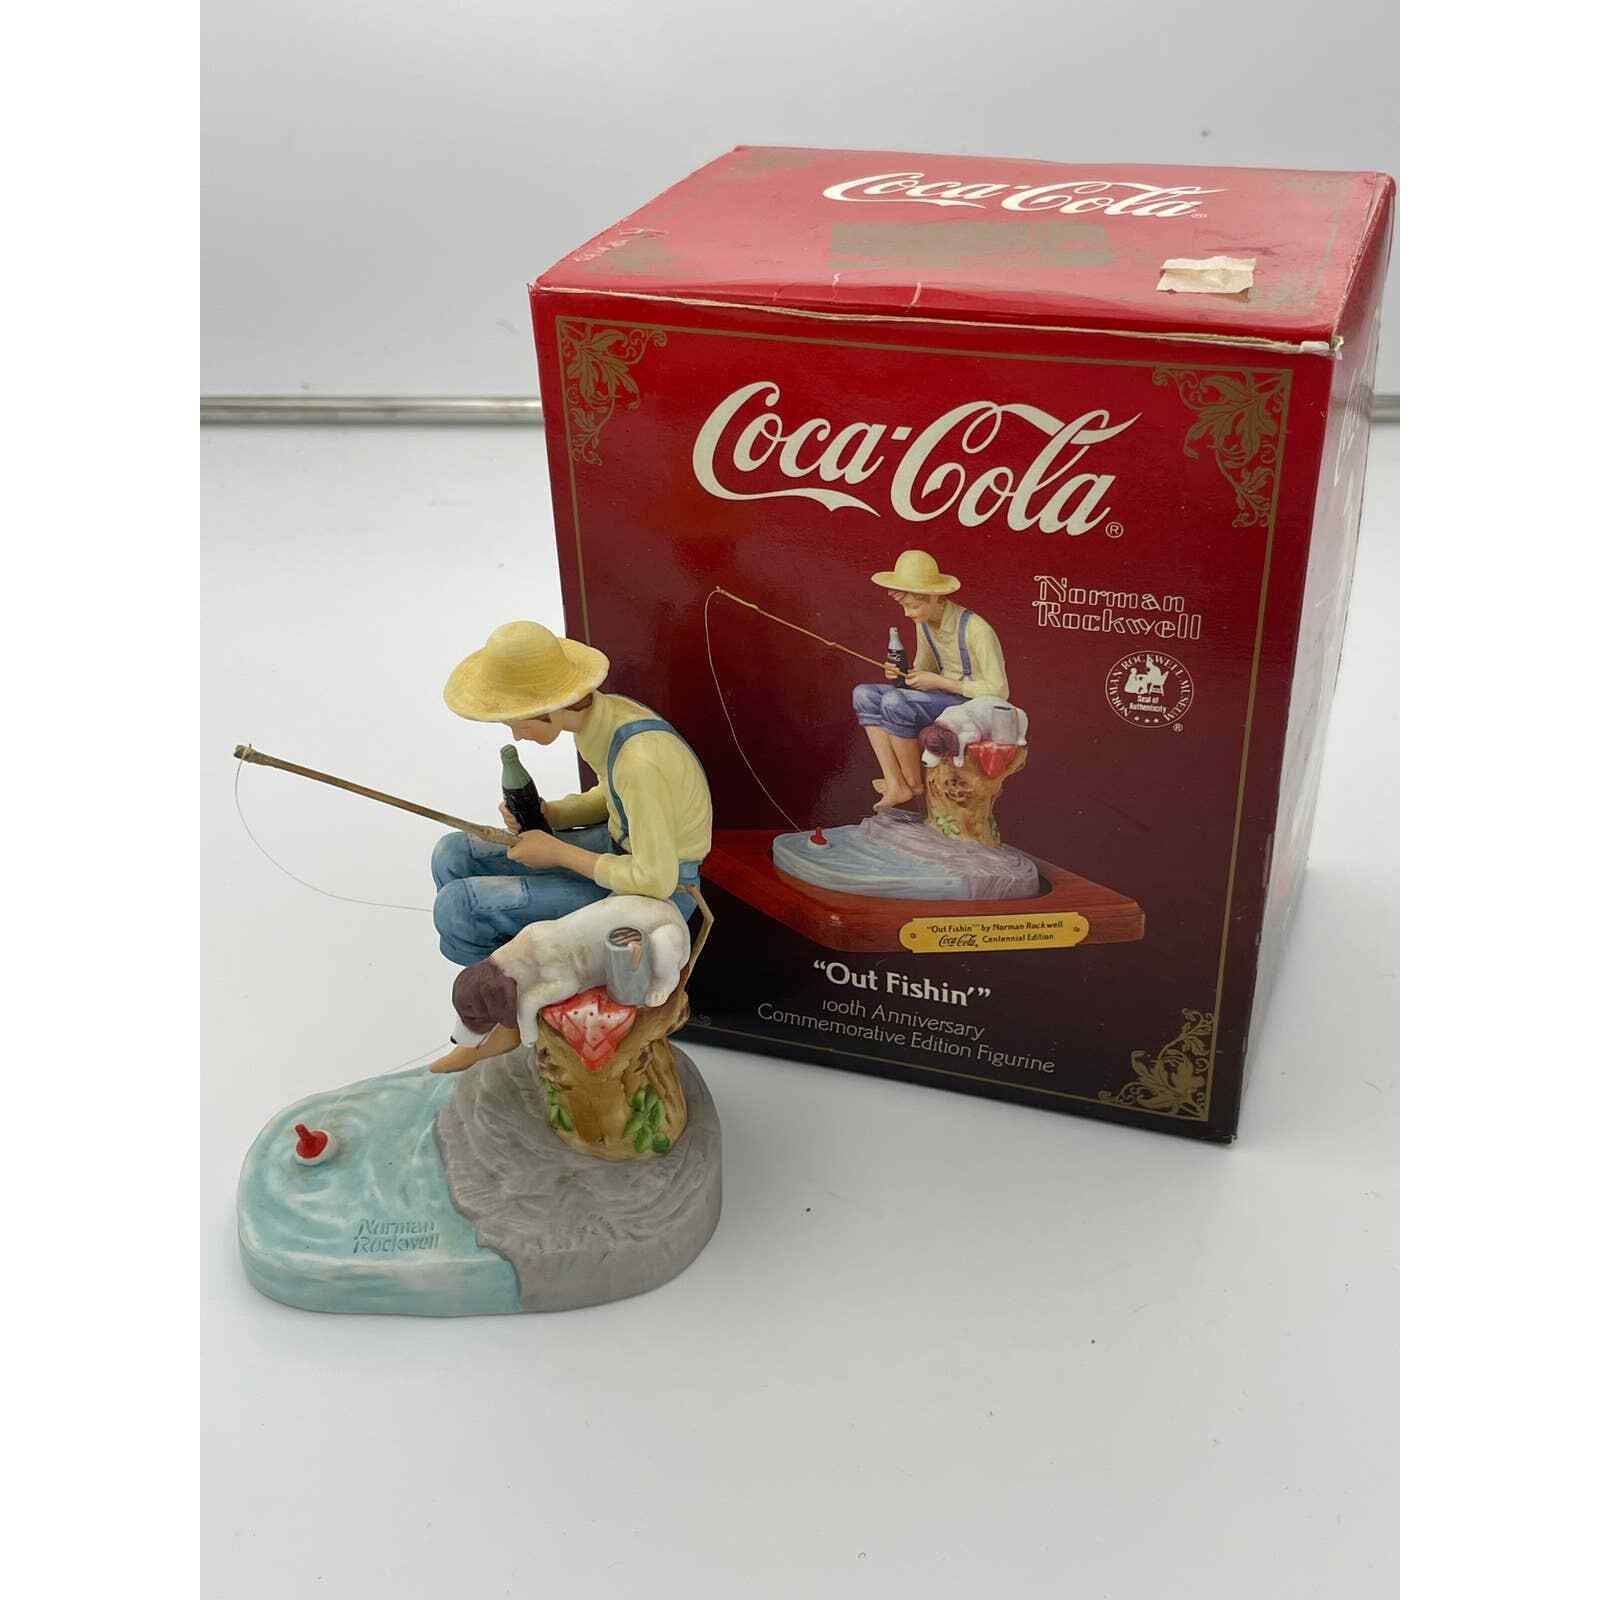 CocaCola Norman Rockwell Out Fishin 100th Anniv EDT Figurine 5613 of 25,000